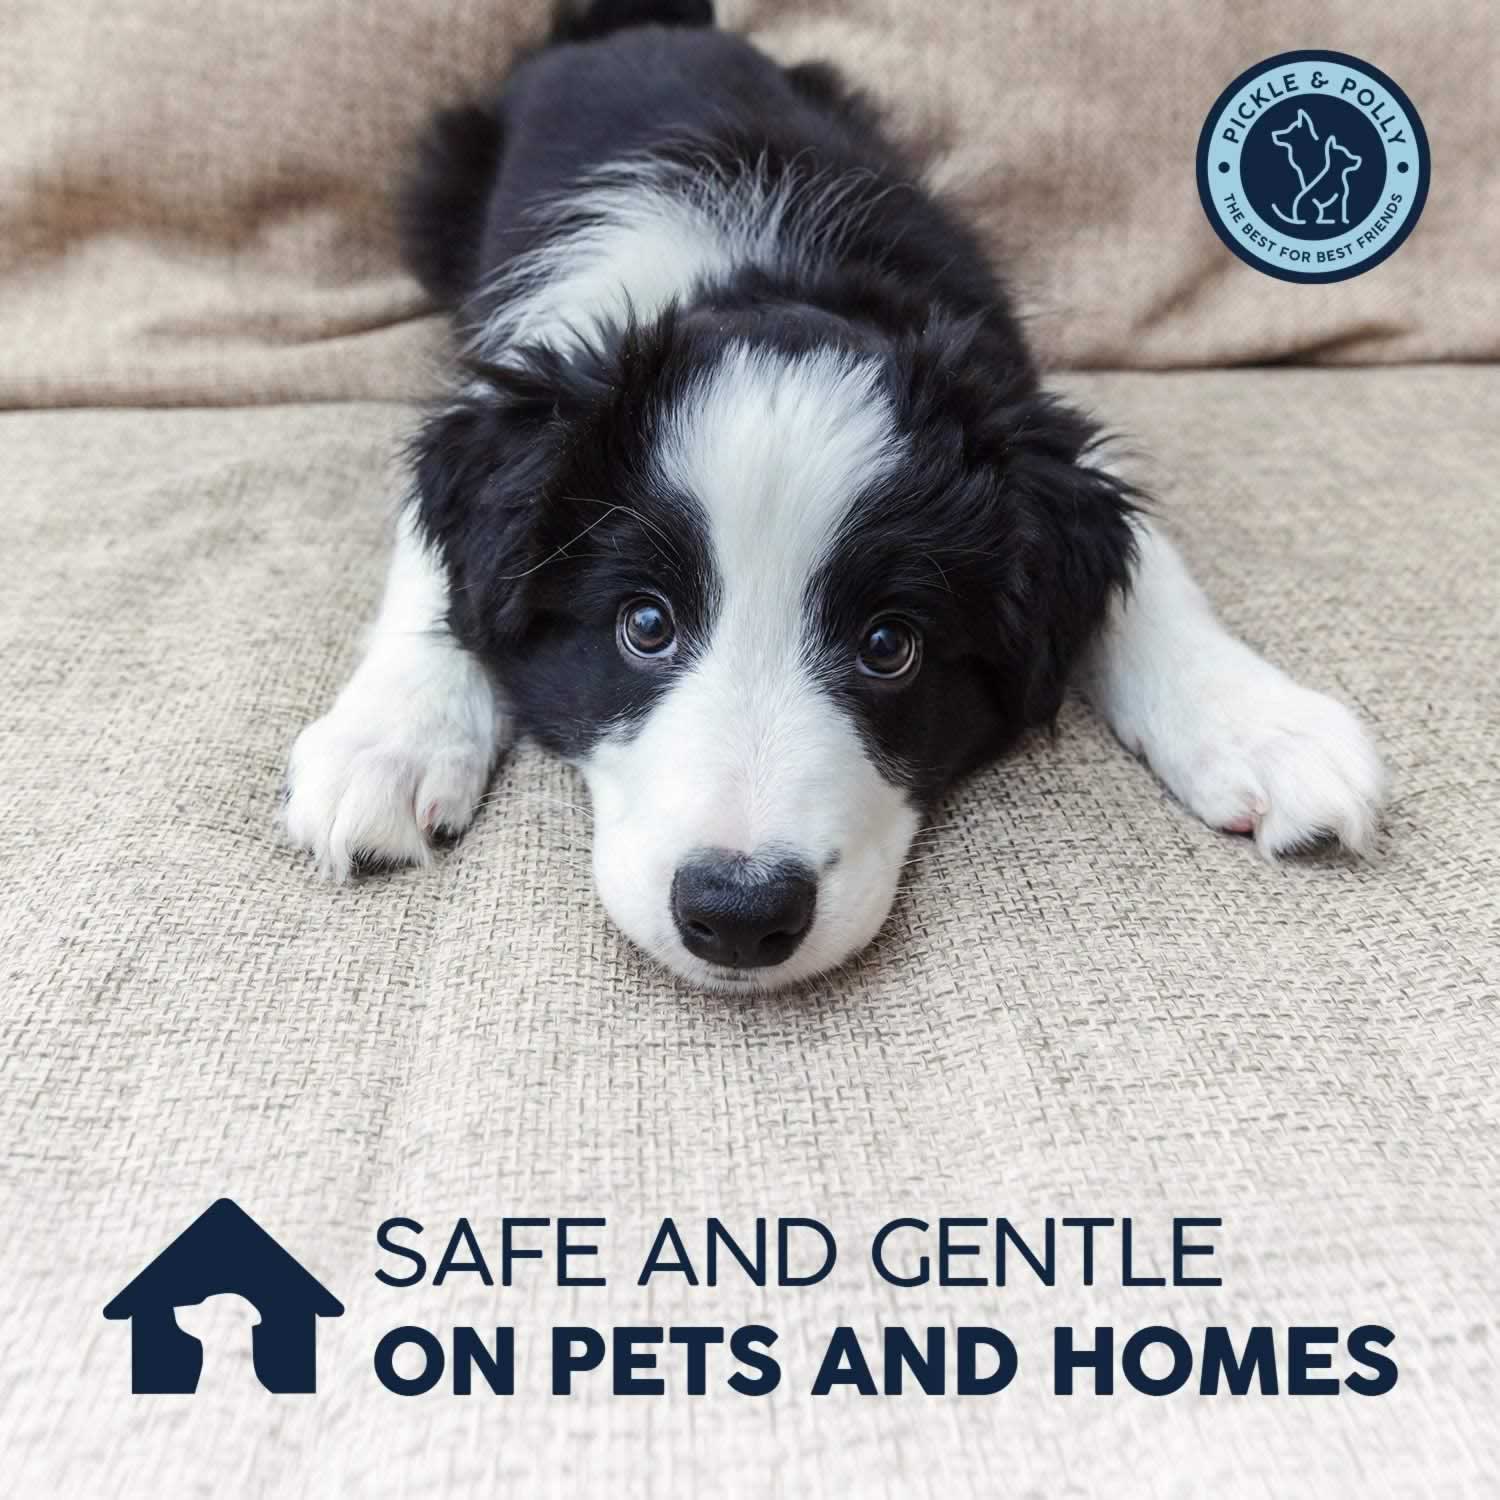 A white and black puppy laying on a couch. The text reads, "Safe and Gentle on Pets and Homes."